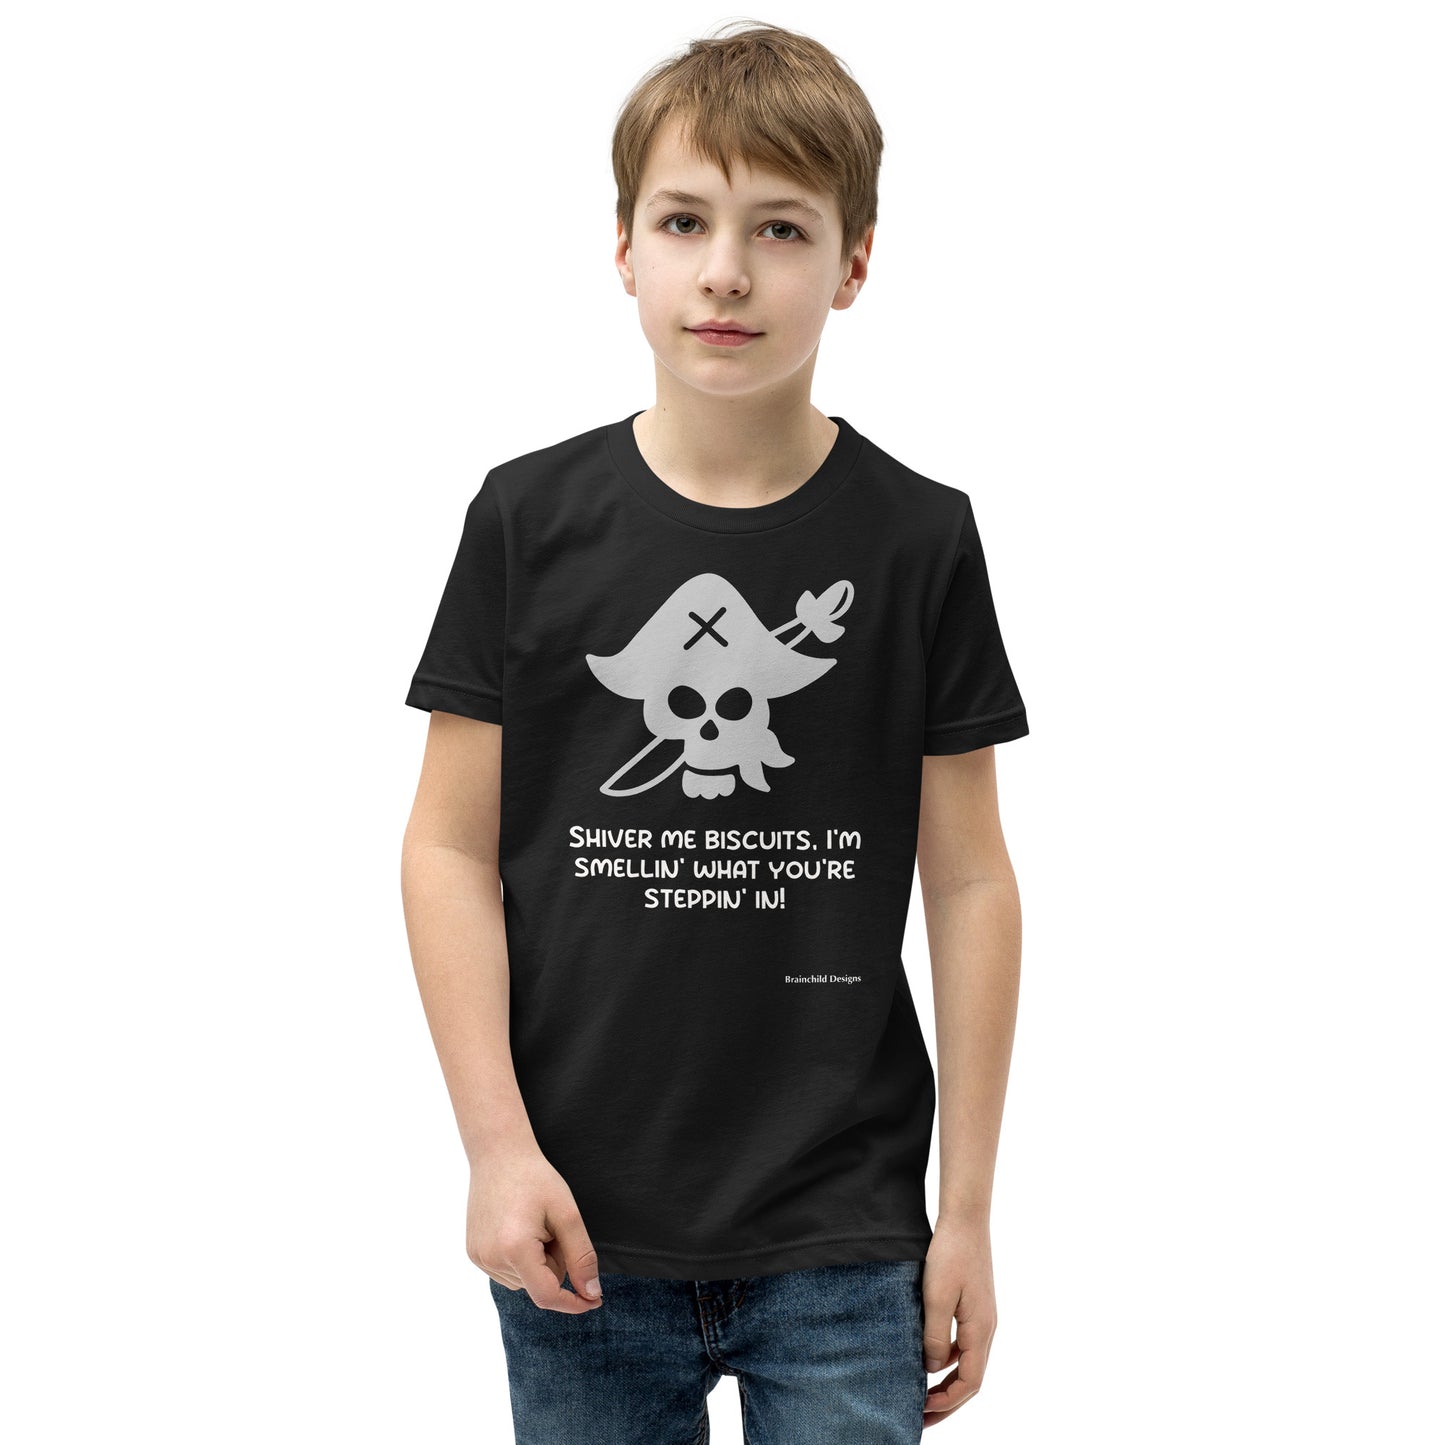 Shiver Me Biscuits - Youth Unisex Short Sleeve T-Shirt